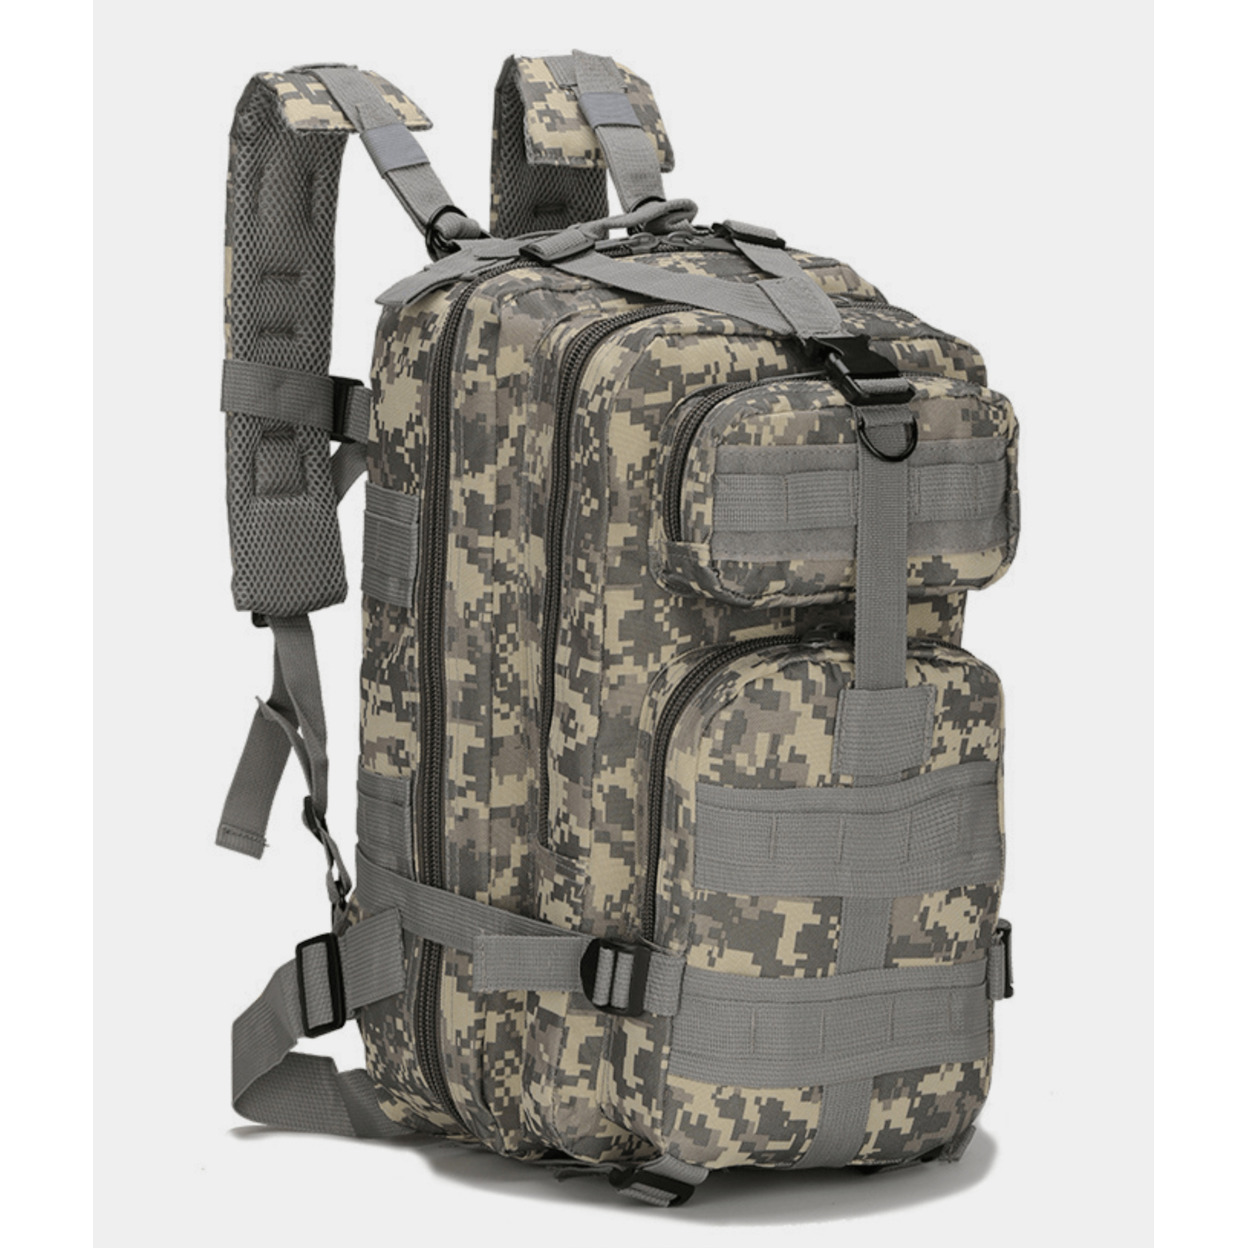 Tactical 25L Molle Backpack - Camouflage